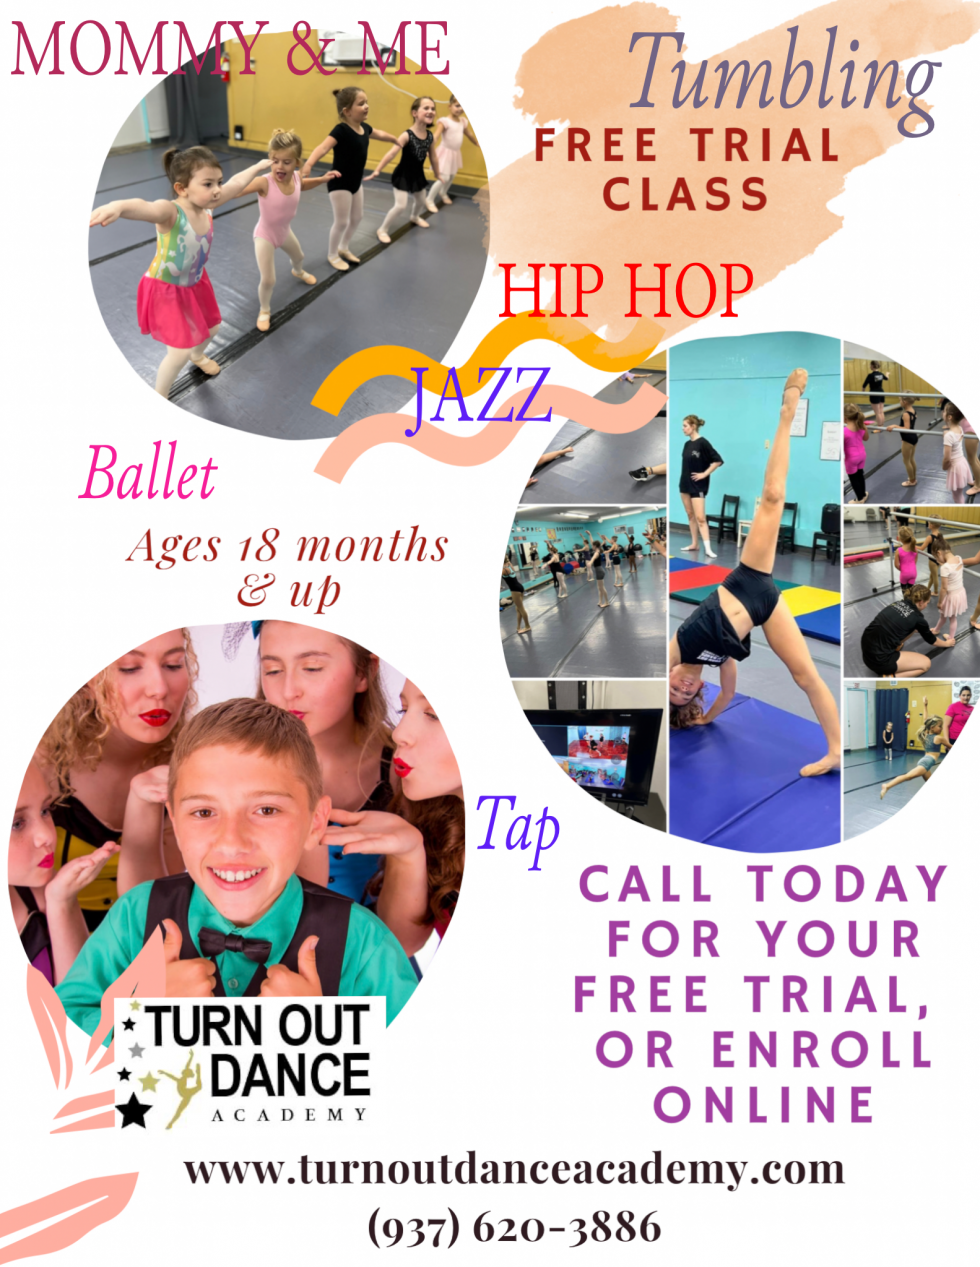 Turnout Academy Dace classes offered